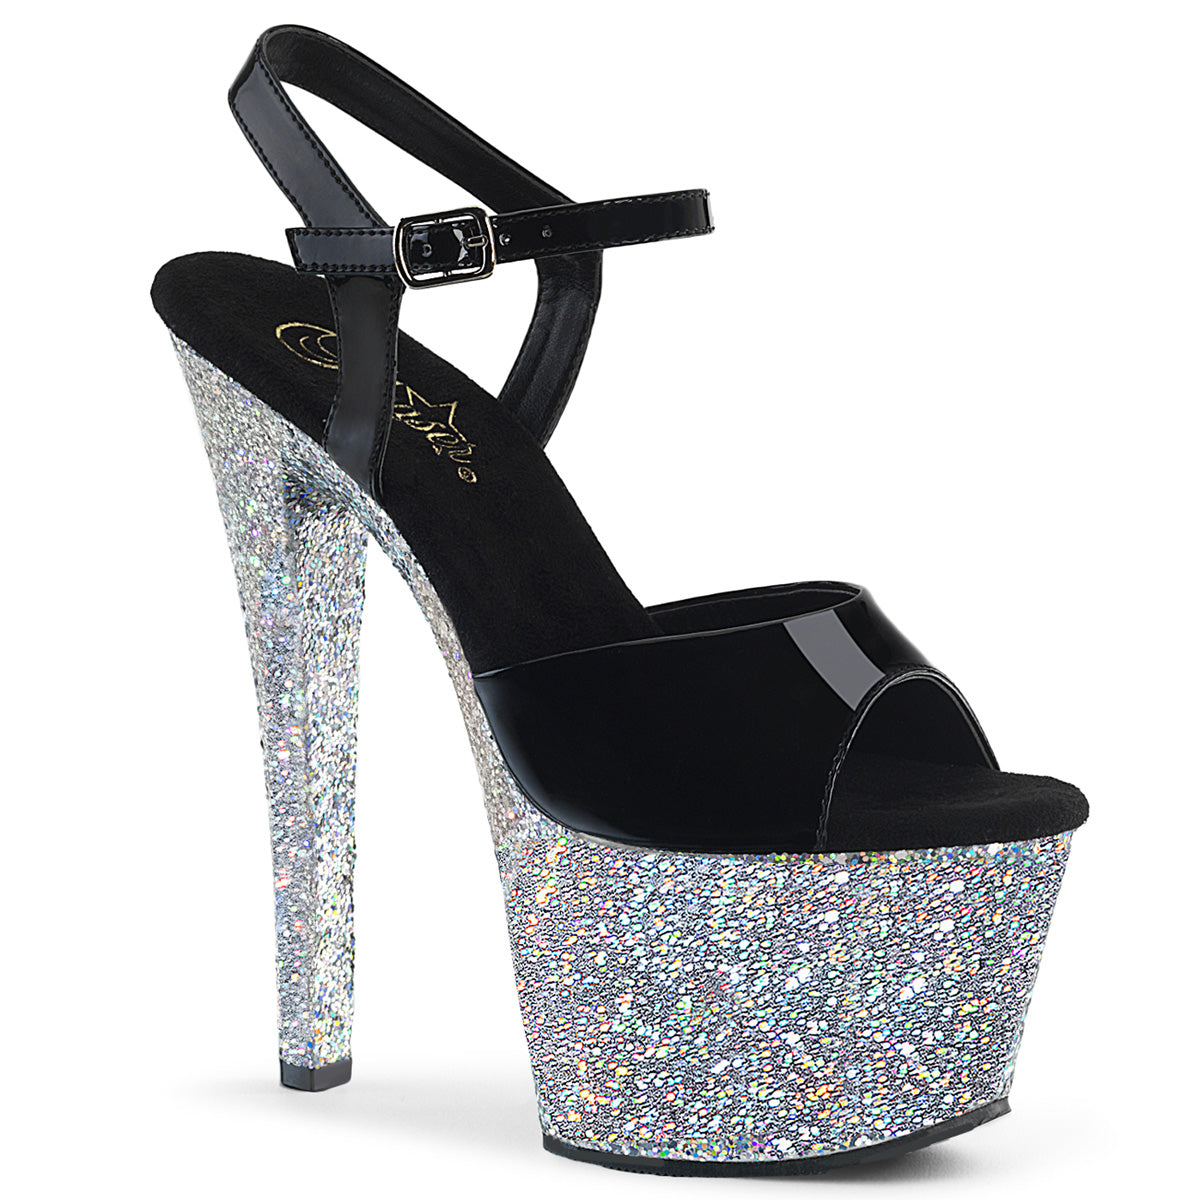 SKY-309LG Pleaser 7" Heel Black Silver Glitter Sexy Shoes-Pleaser- Sexy Shoes